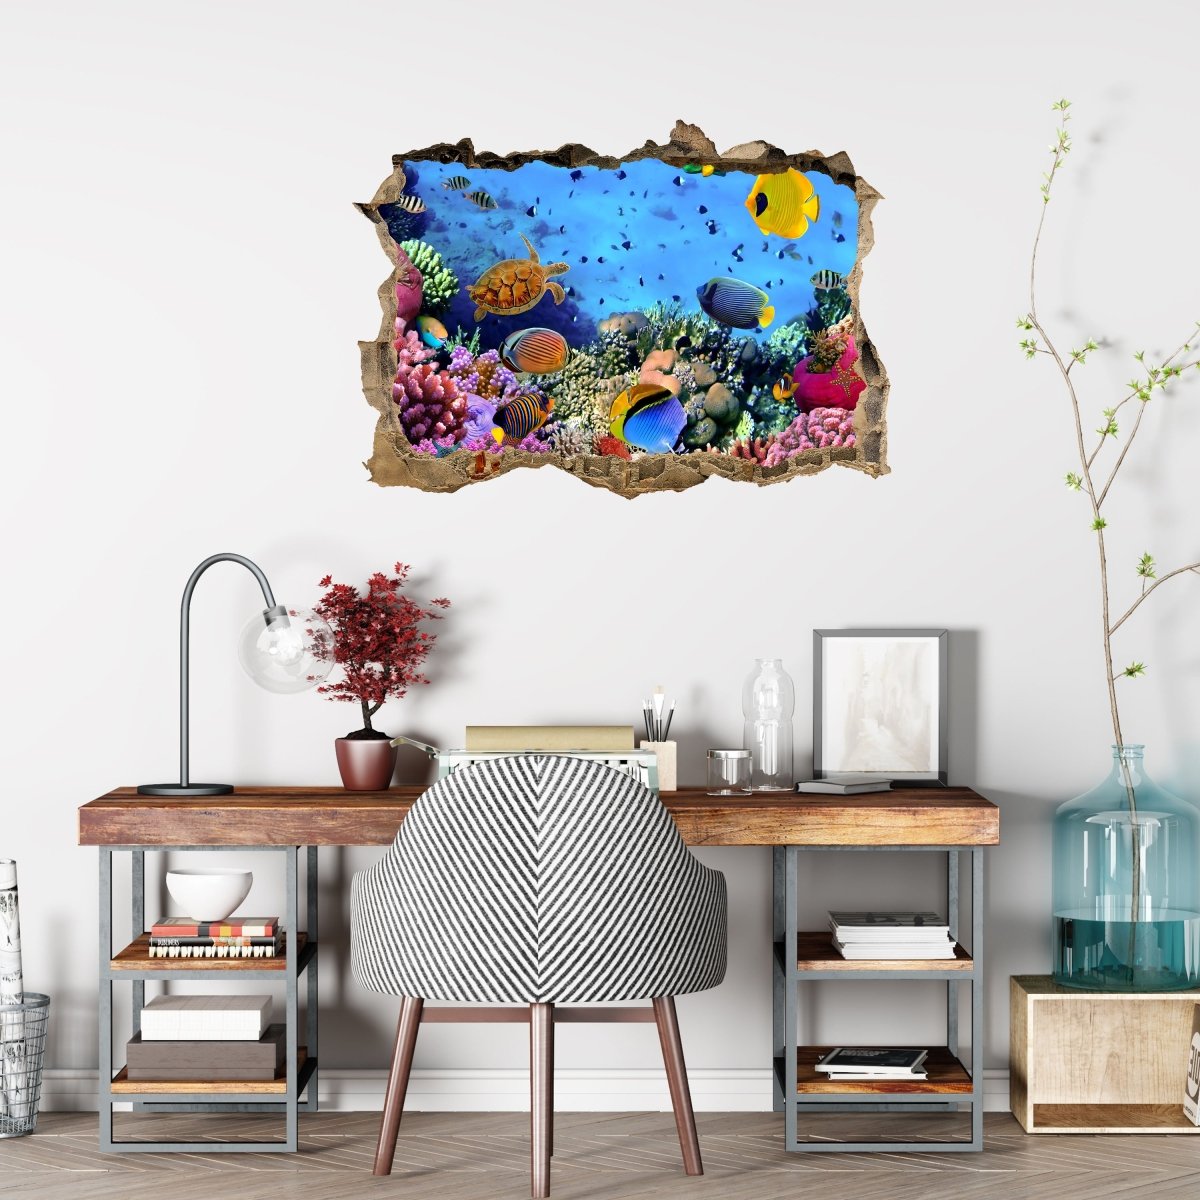 3D wall sticker coral reef with fish - Wall Decal M0480